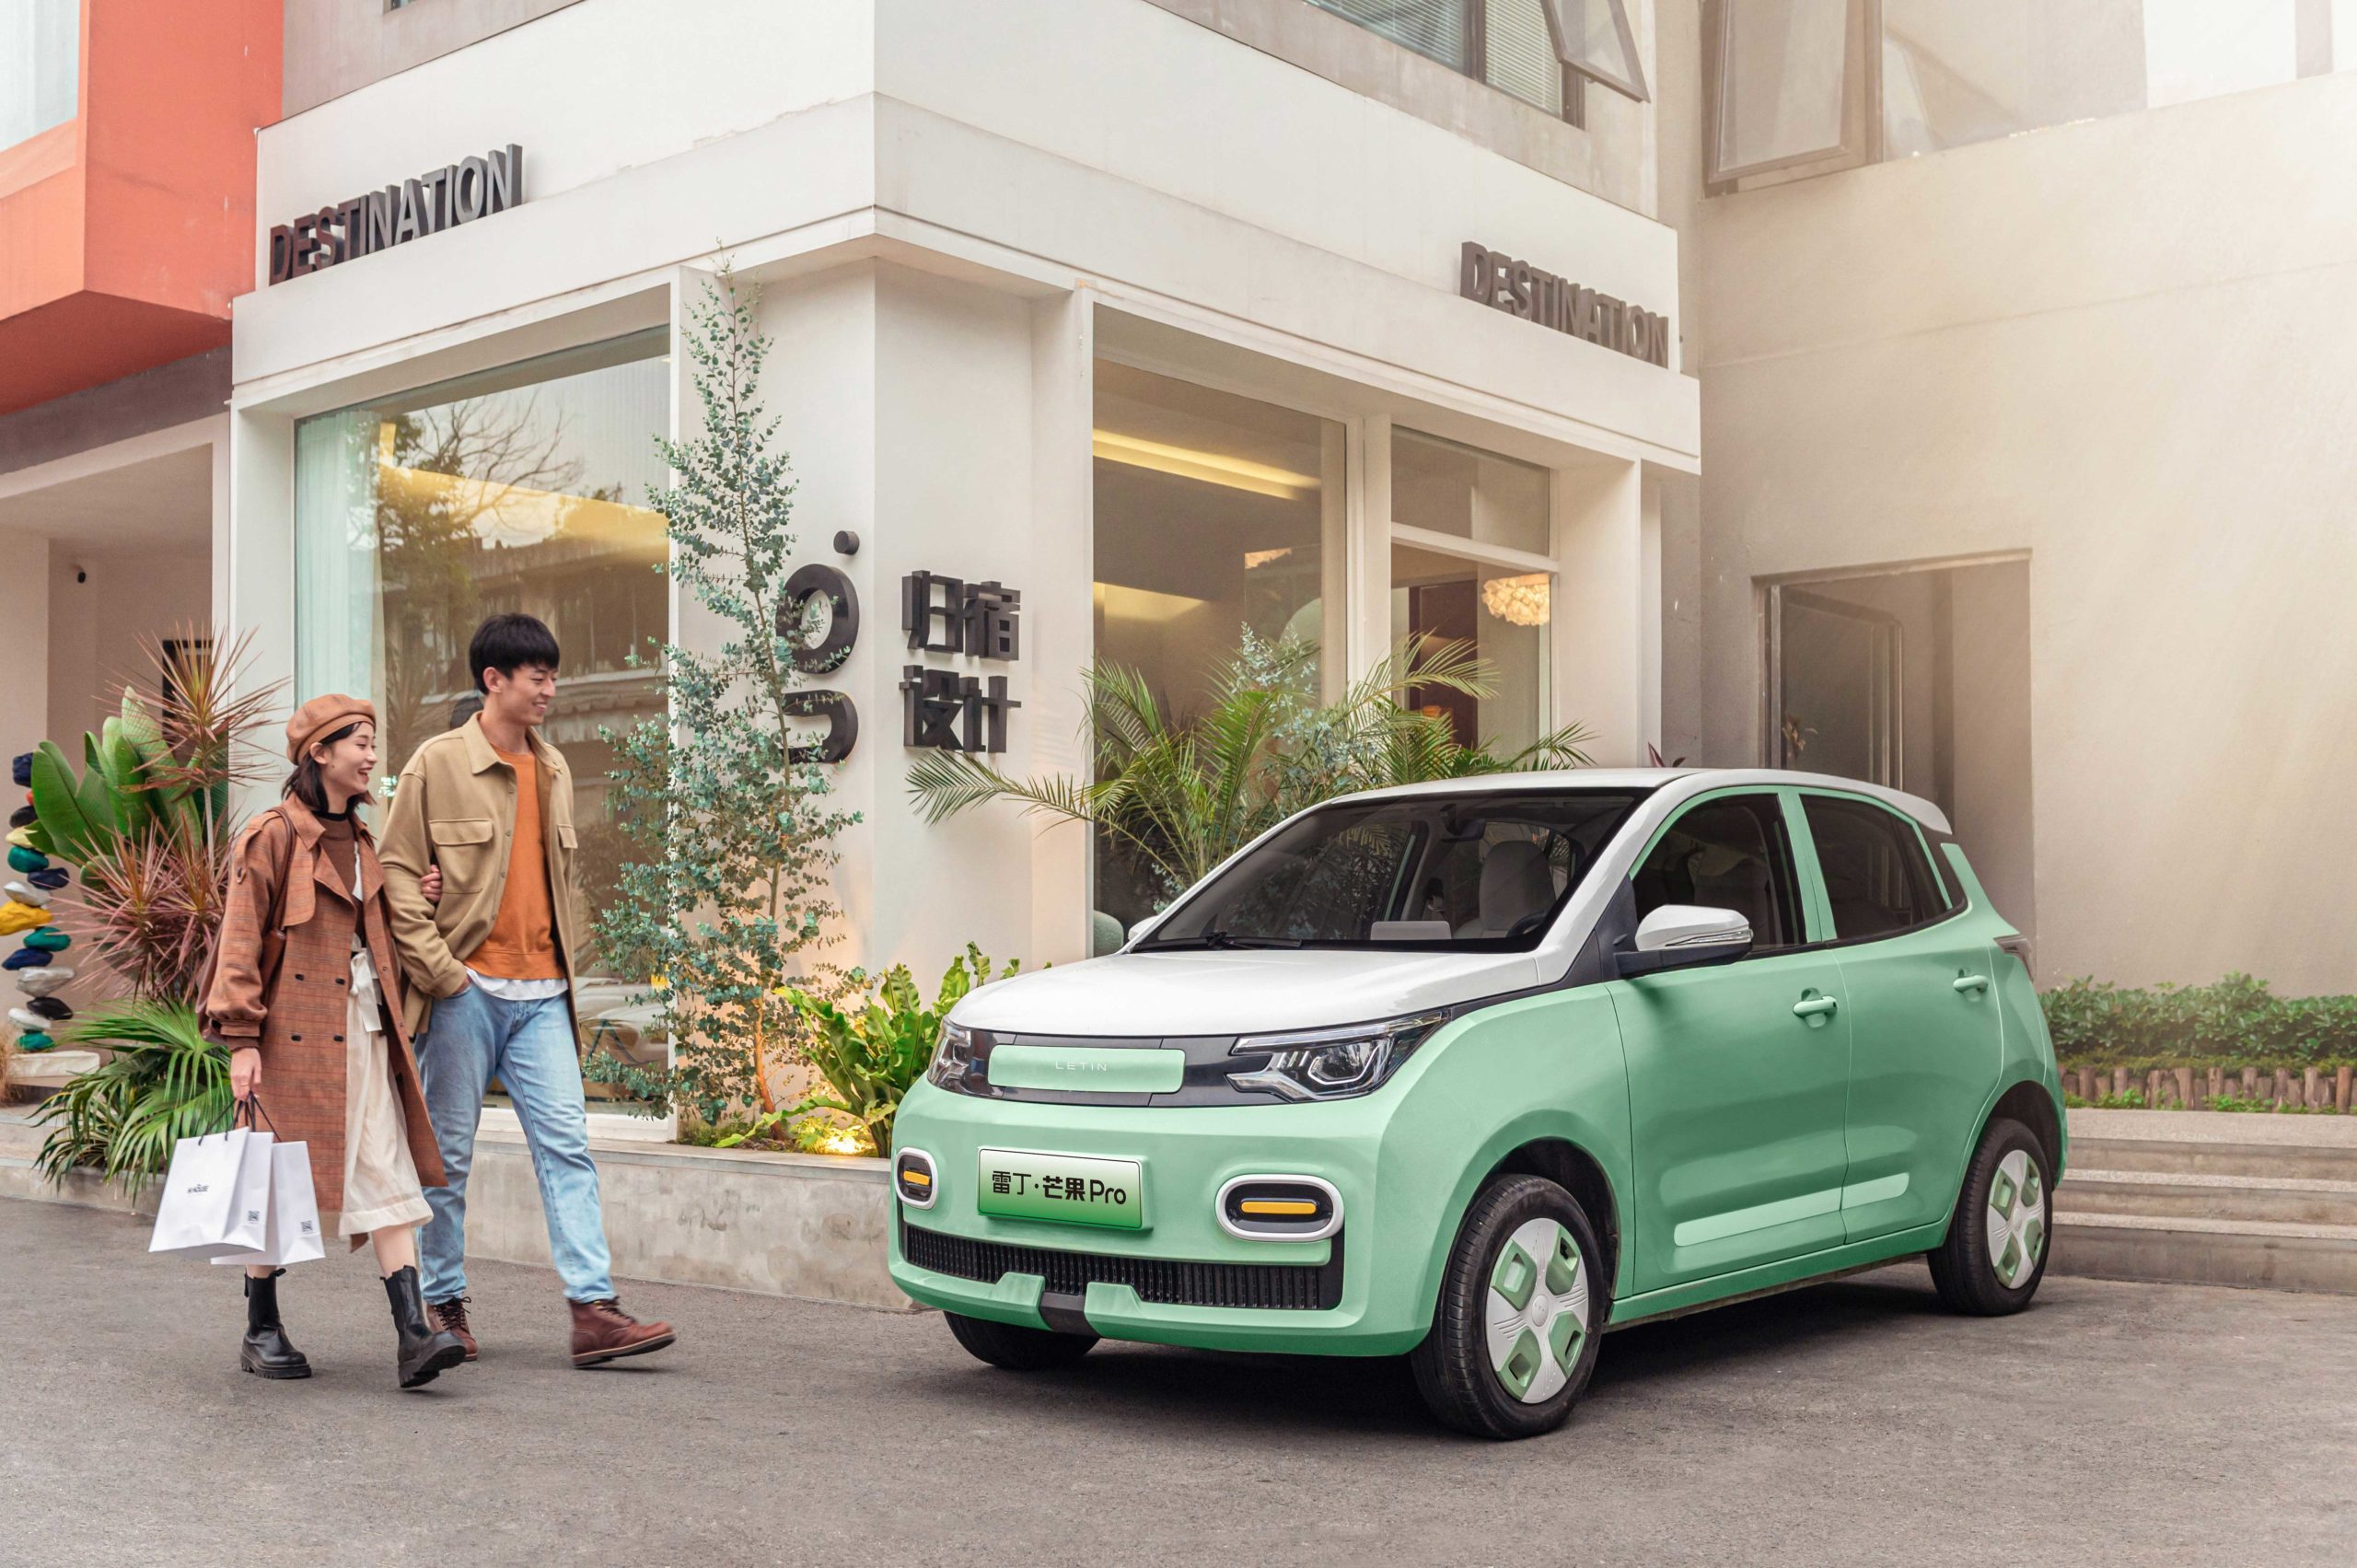 China's Letin raises $447m in Series A round to expand NEV sales